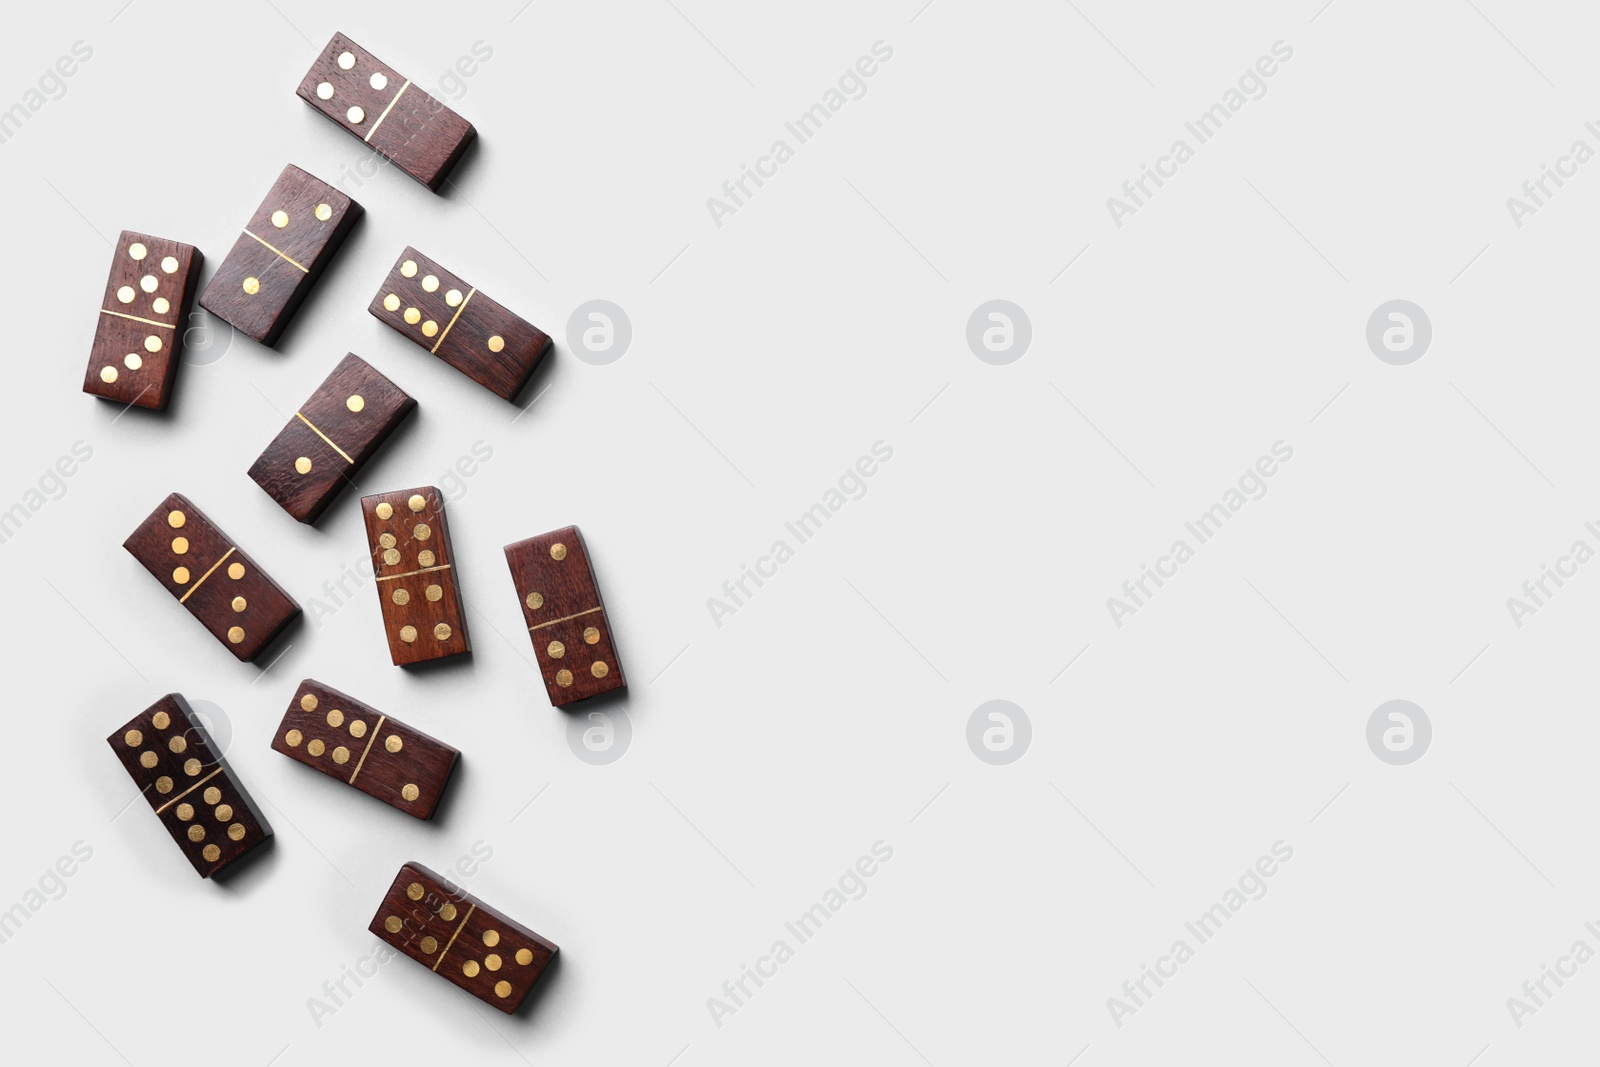 Photo of Wooden domino tiles on white background, flat lay. Space for text